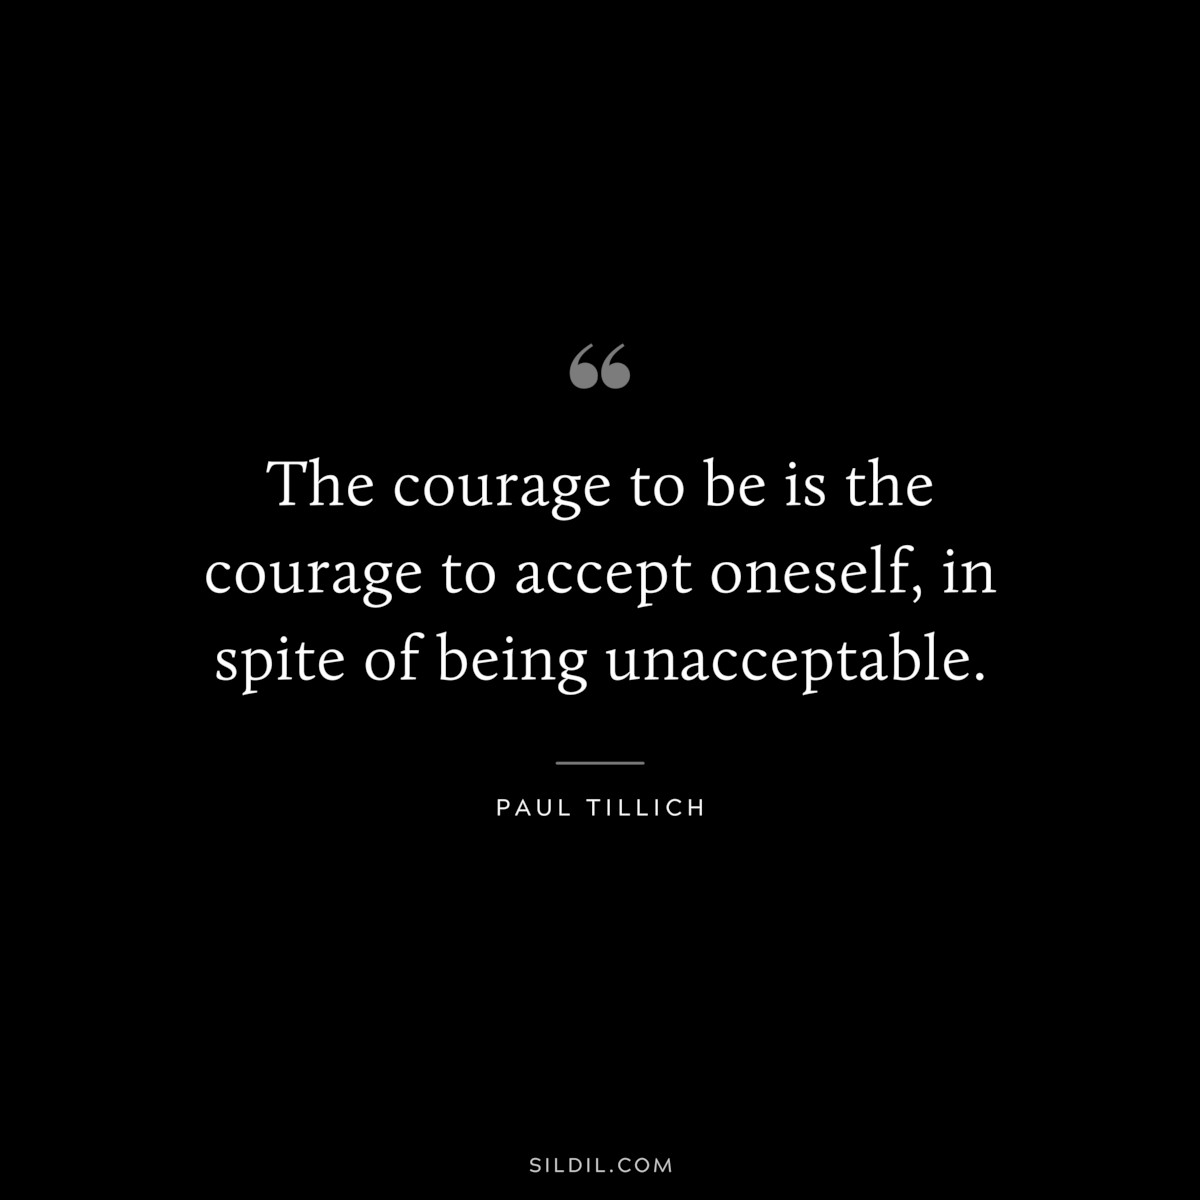 The courage to be is the courage to accept oneself, in spite of being unacceptable. ― Paul Tillich